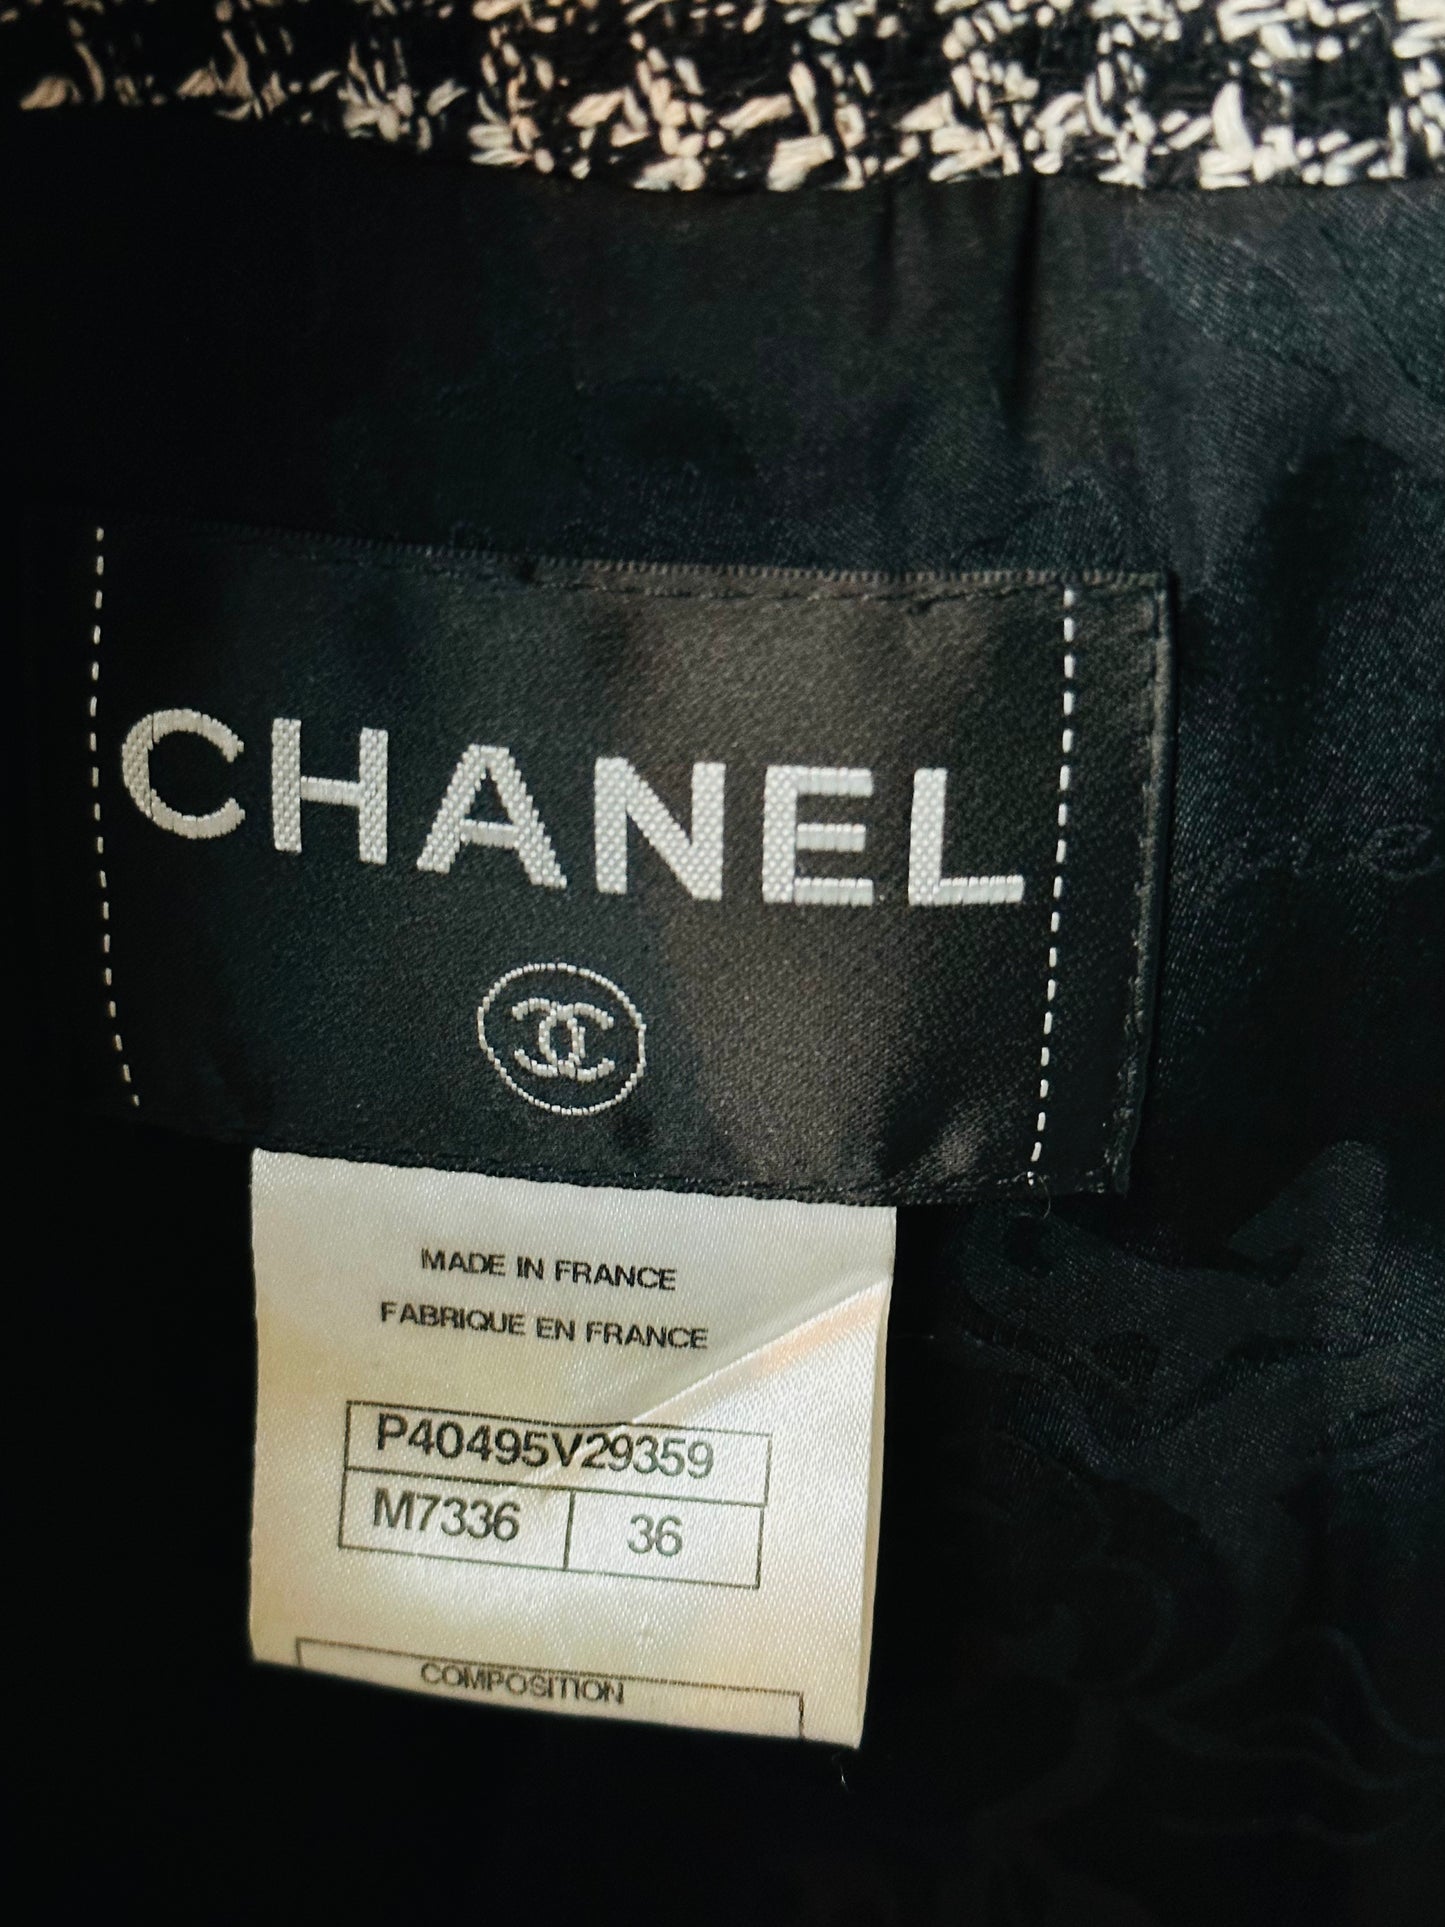 CHANEL - Jacket & Skirt 100% silk Multicolor size 36 and 38FR